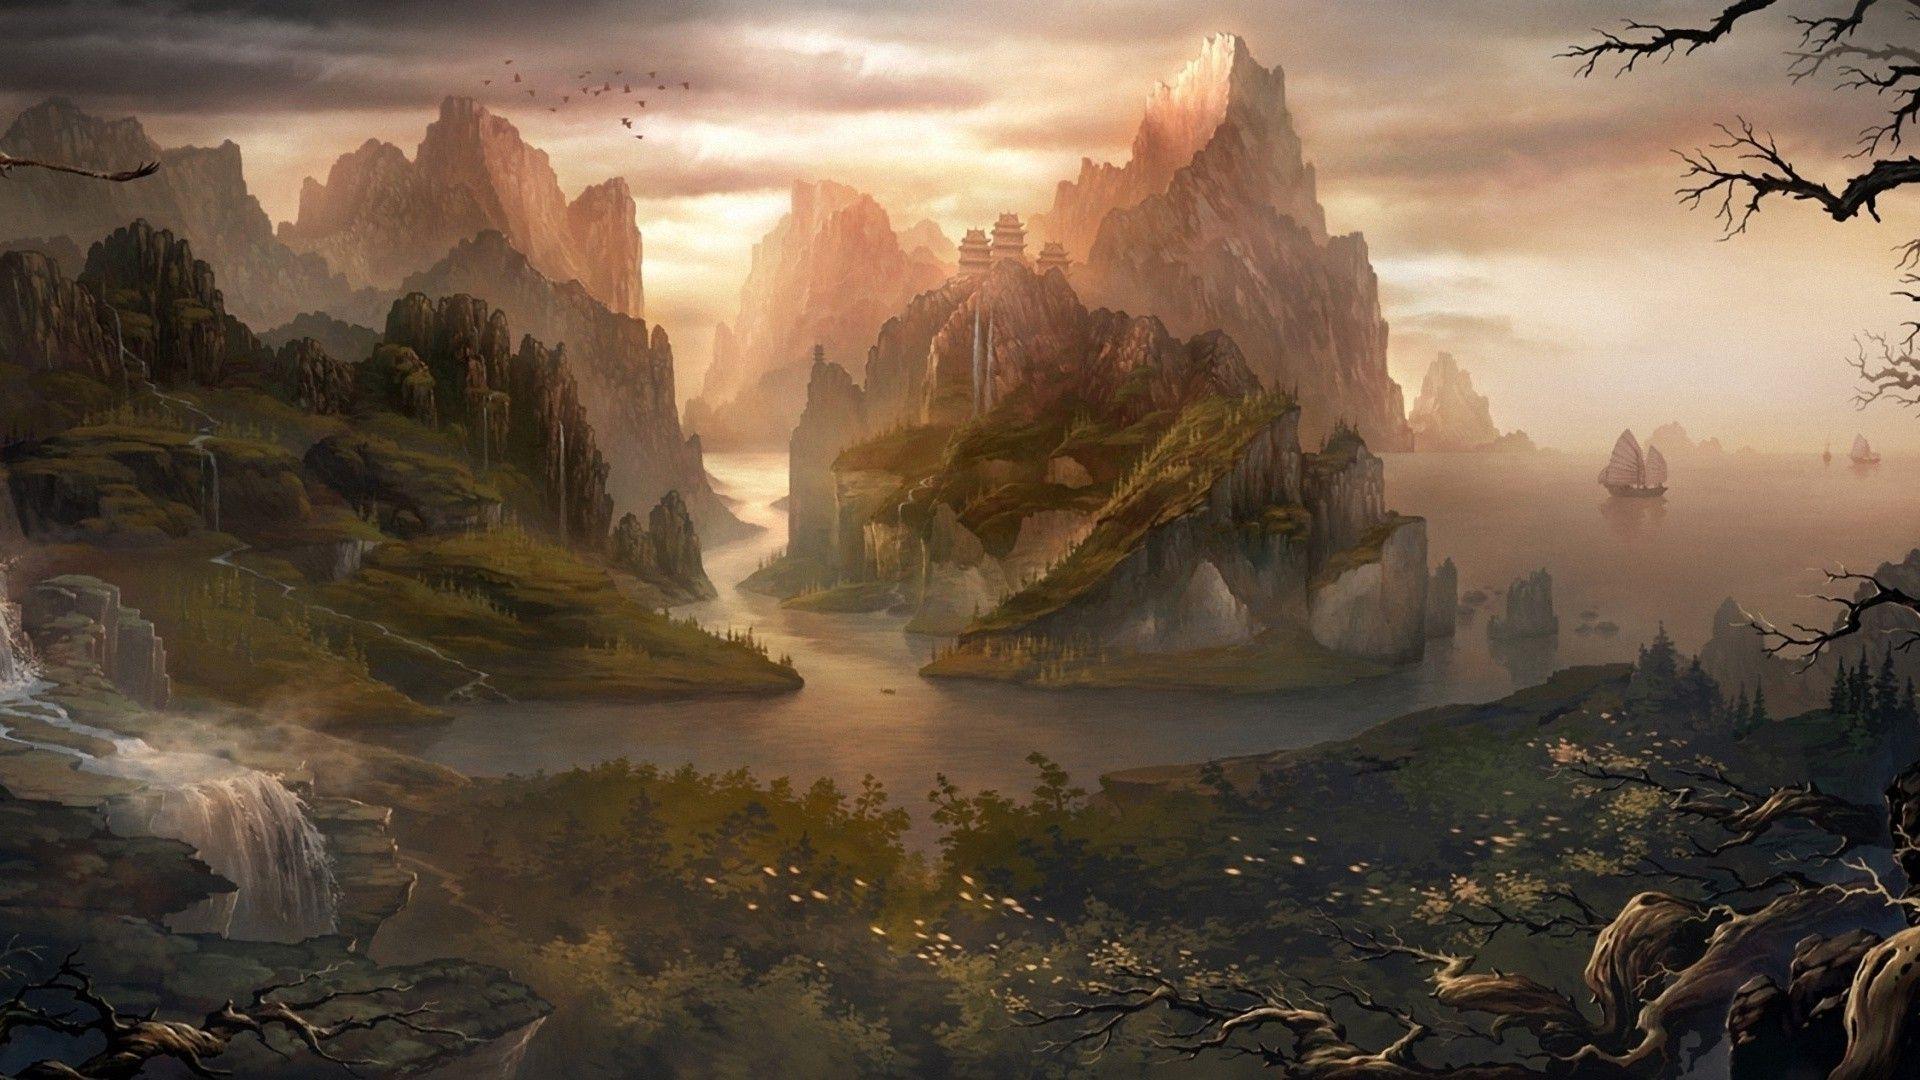 Chinese Fantasy Wallpapers - Top Free Chinese Fantasy Backgrounds